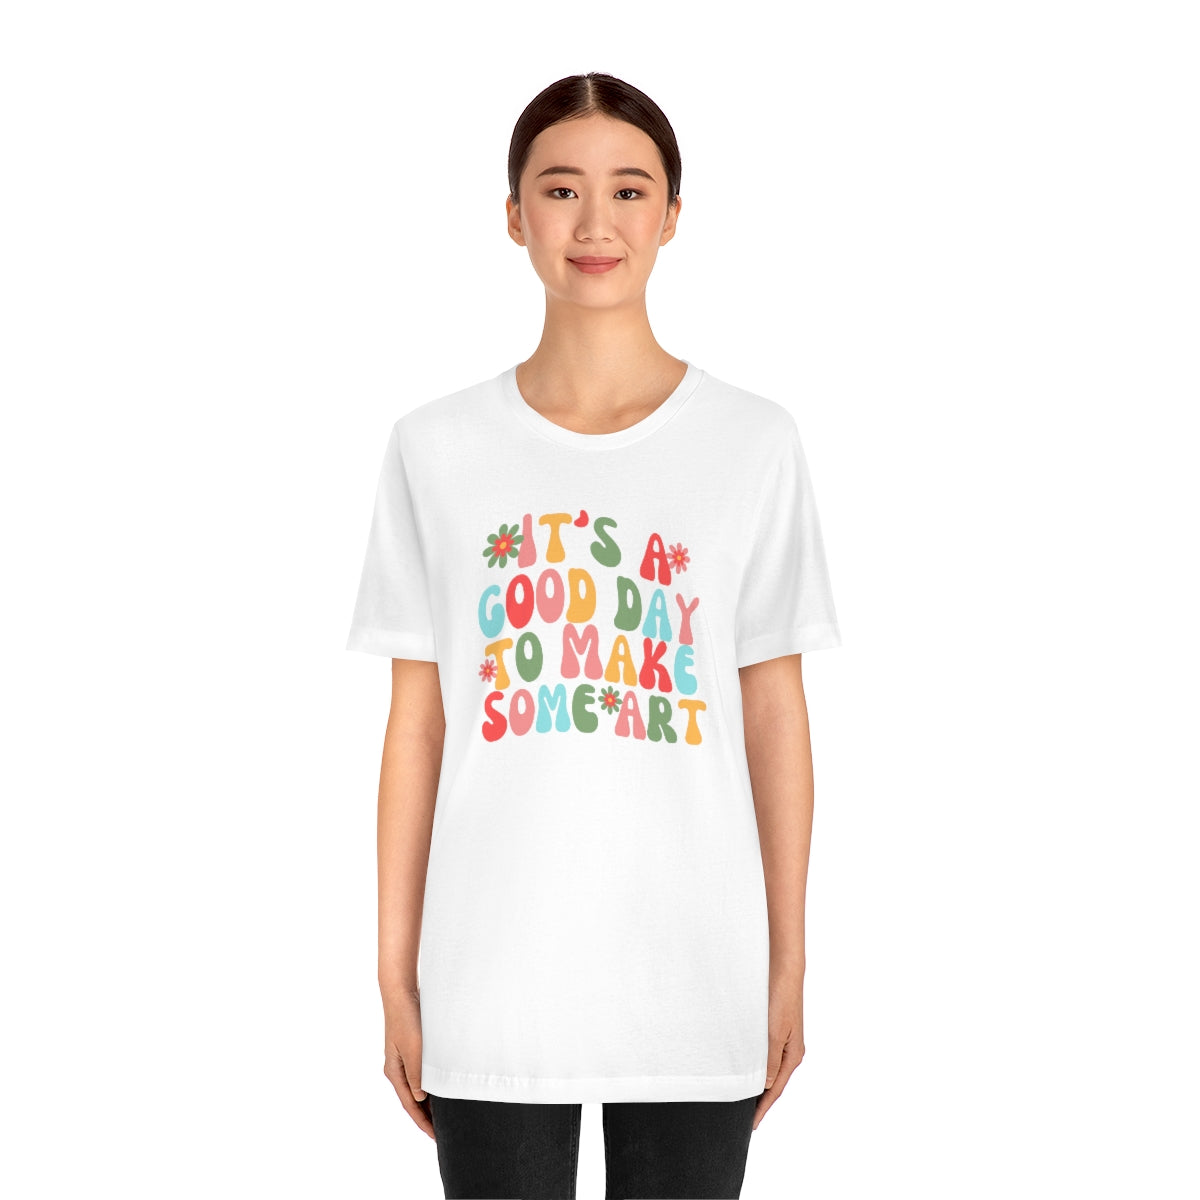 It's a Good Day to Make Some Art Unisex Jersey Short Sleeve Tee